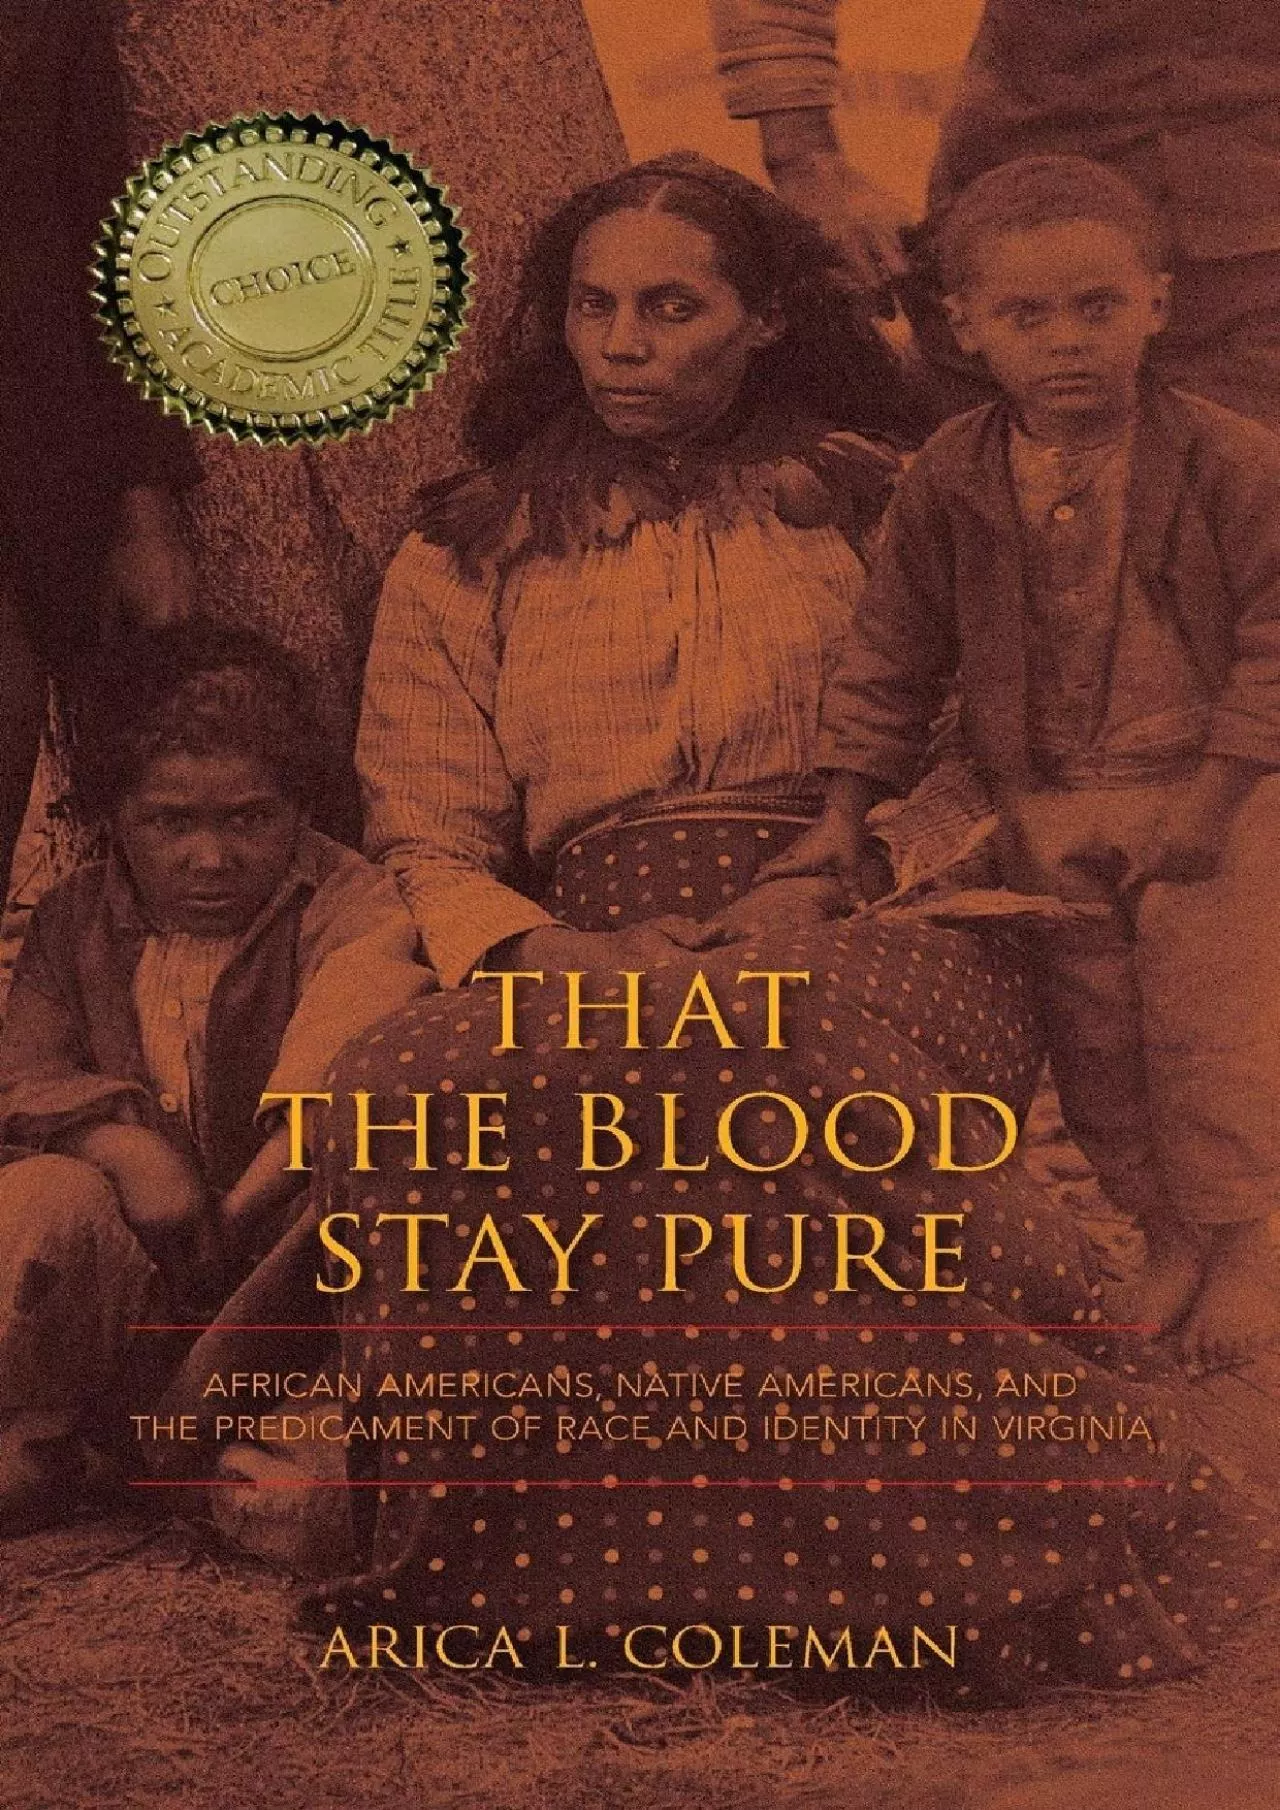 (DOWNLOAD)-That the Blood Stay Pure: African Americans, Native Americans, and the Predicament